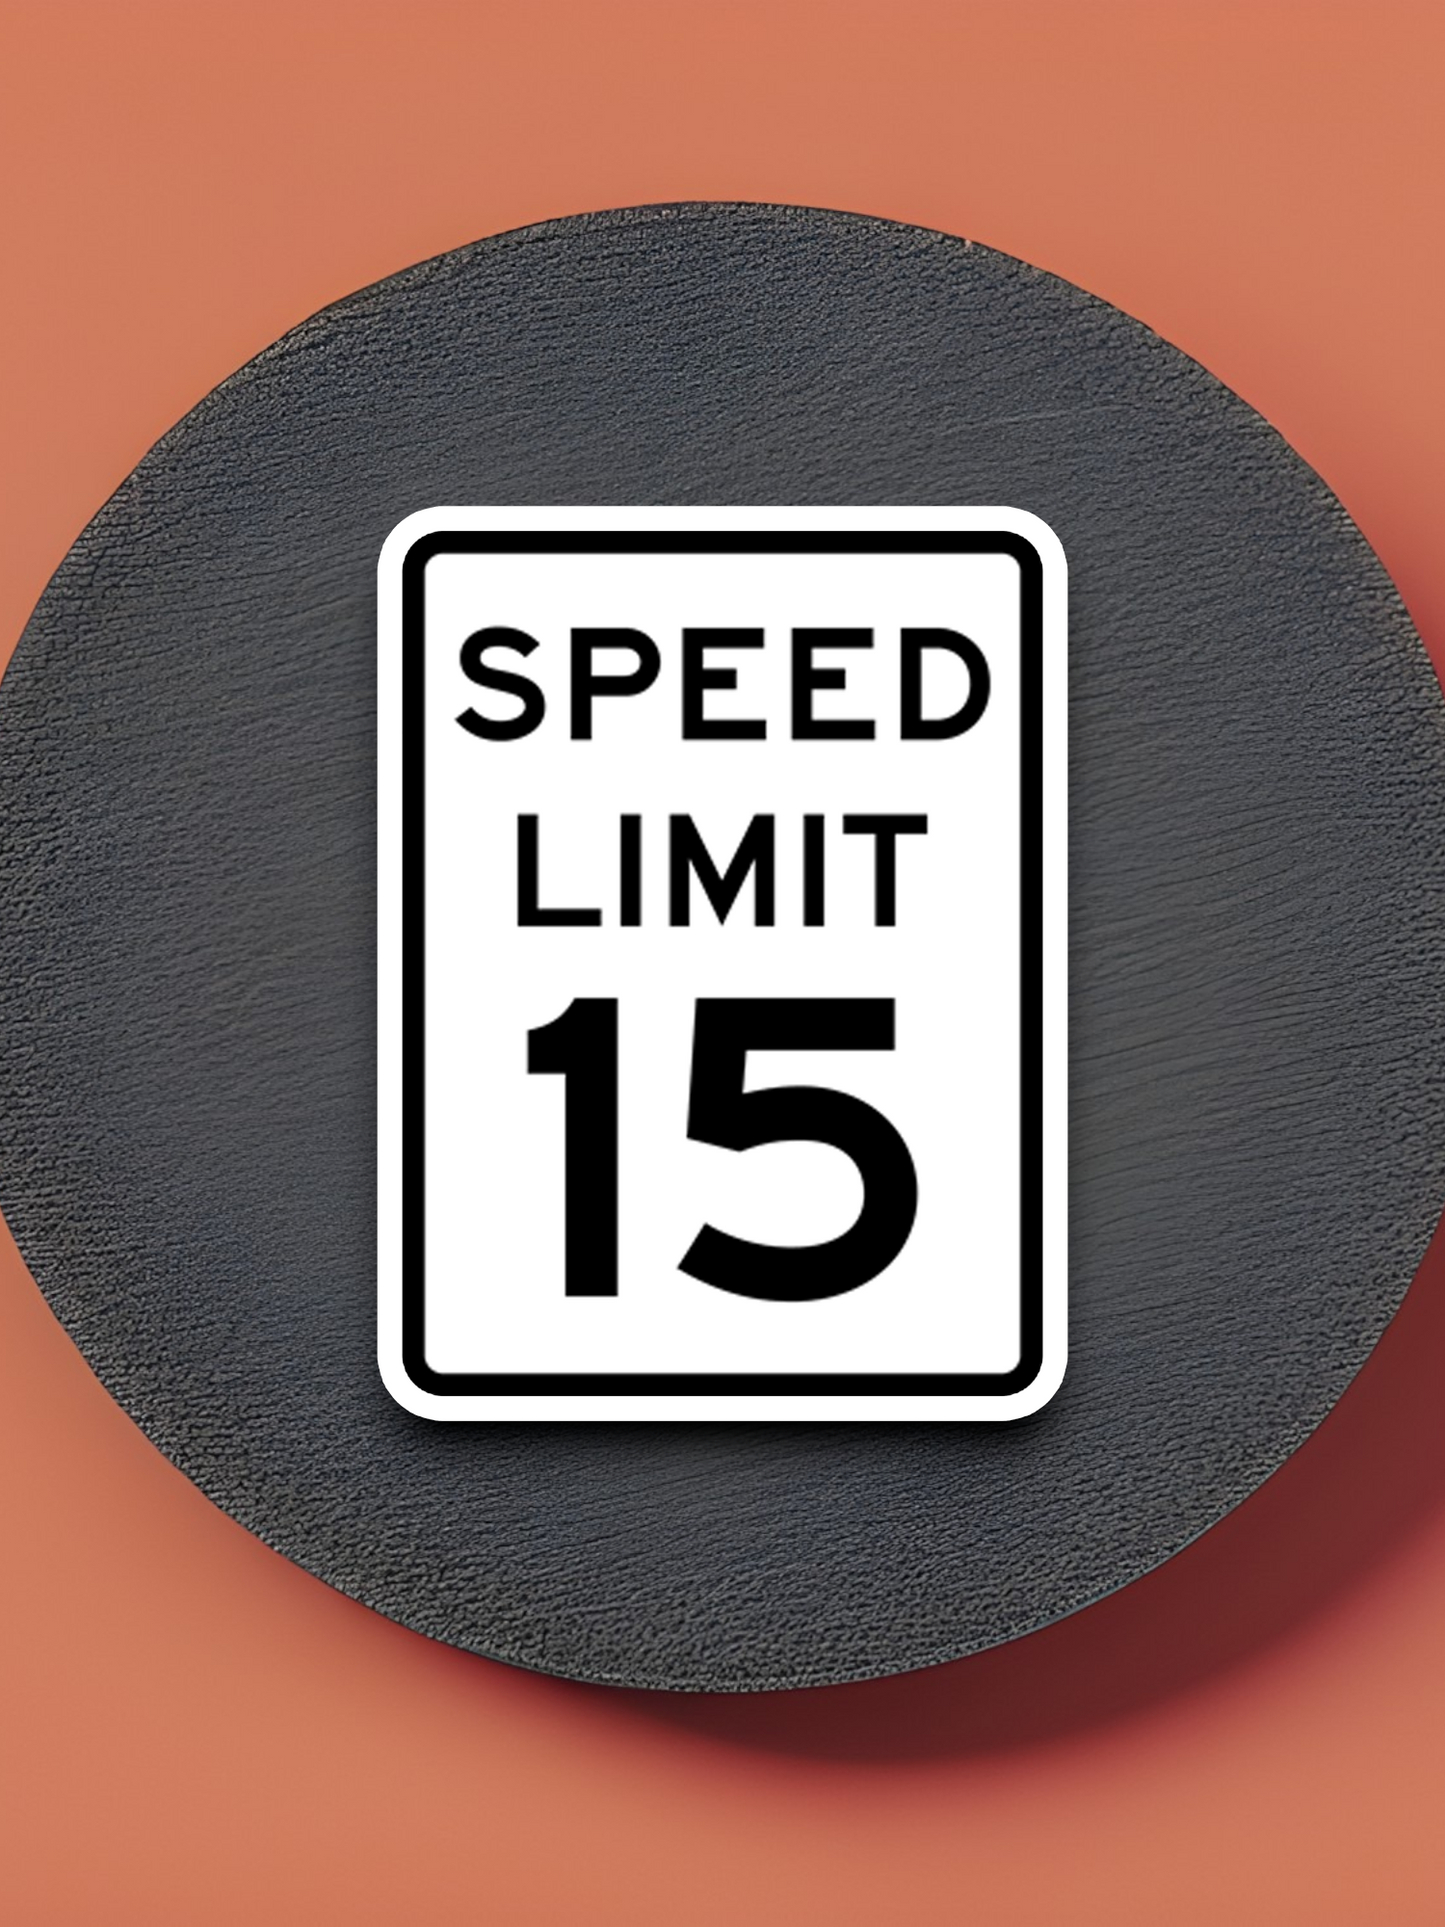 15 Miles Per Hour Speed Limit Road Sign Sticker